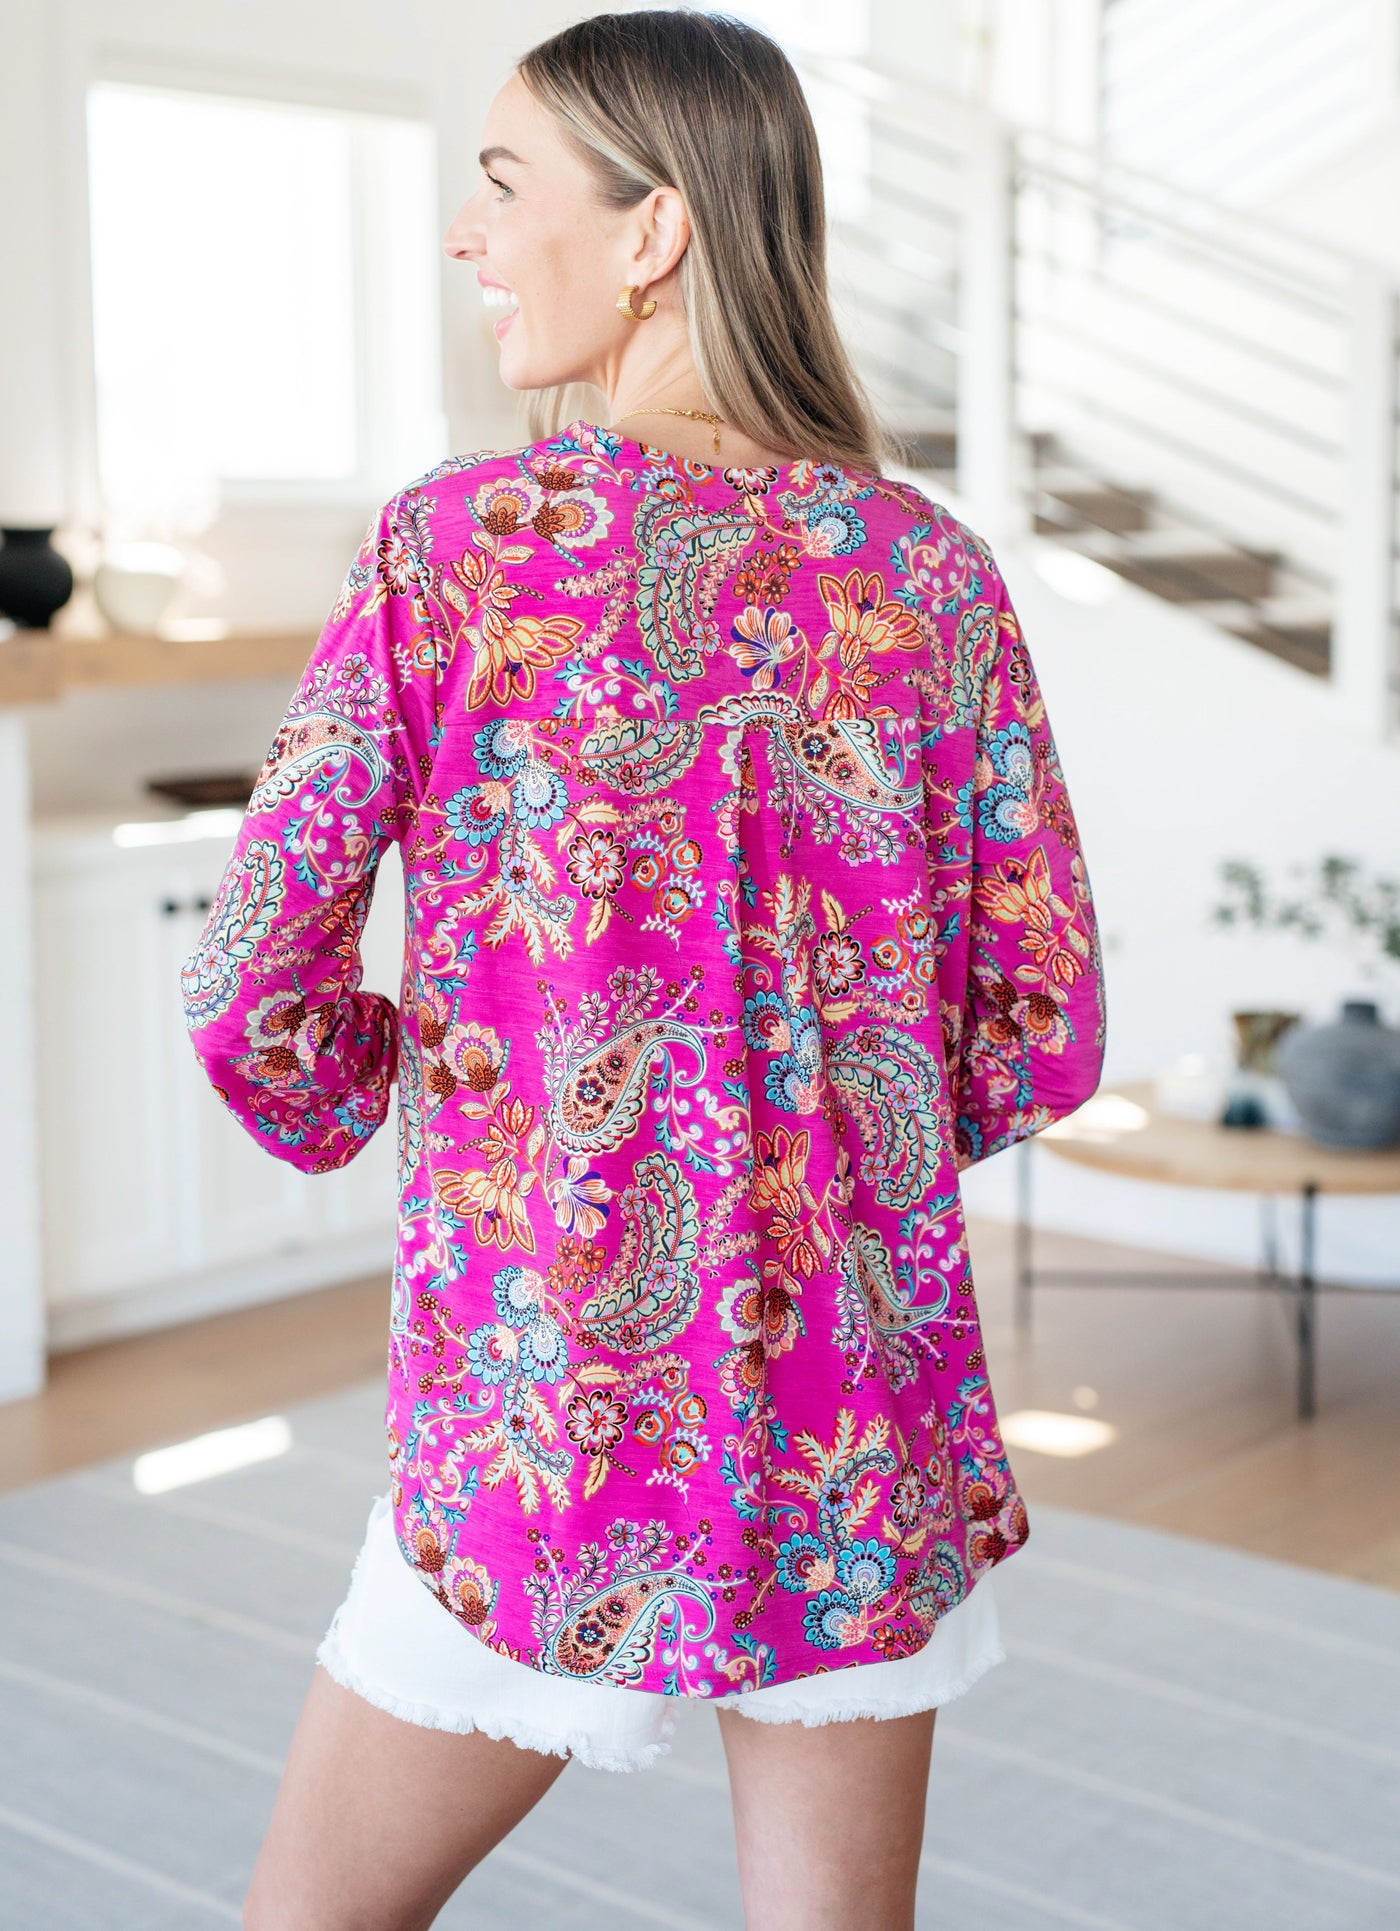 Lizzy Top in Magenta Floral Paisley-Tops-Ave Shops-Market Street Nest, Fashionable Clothing, Shoes and Home Décor Located in Mabank, TX